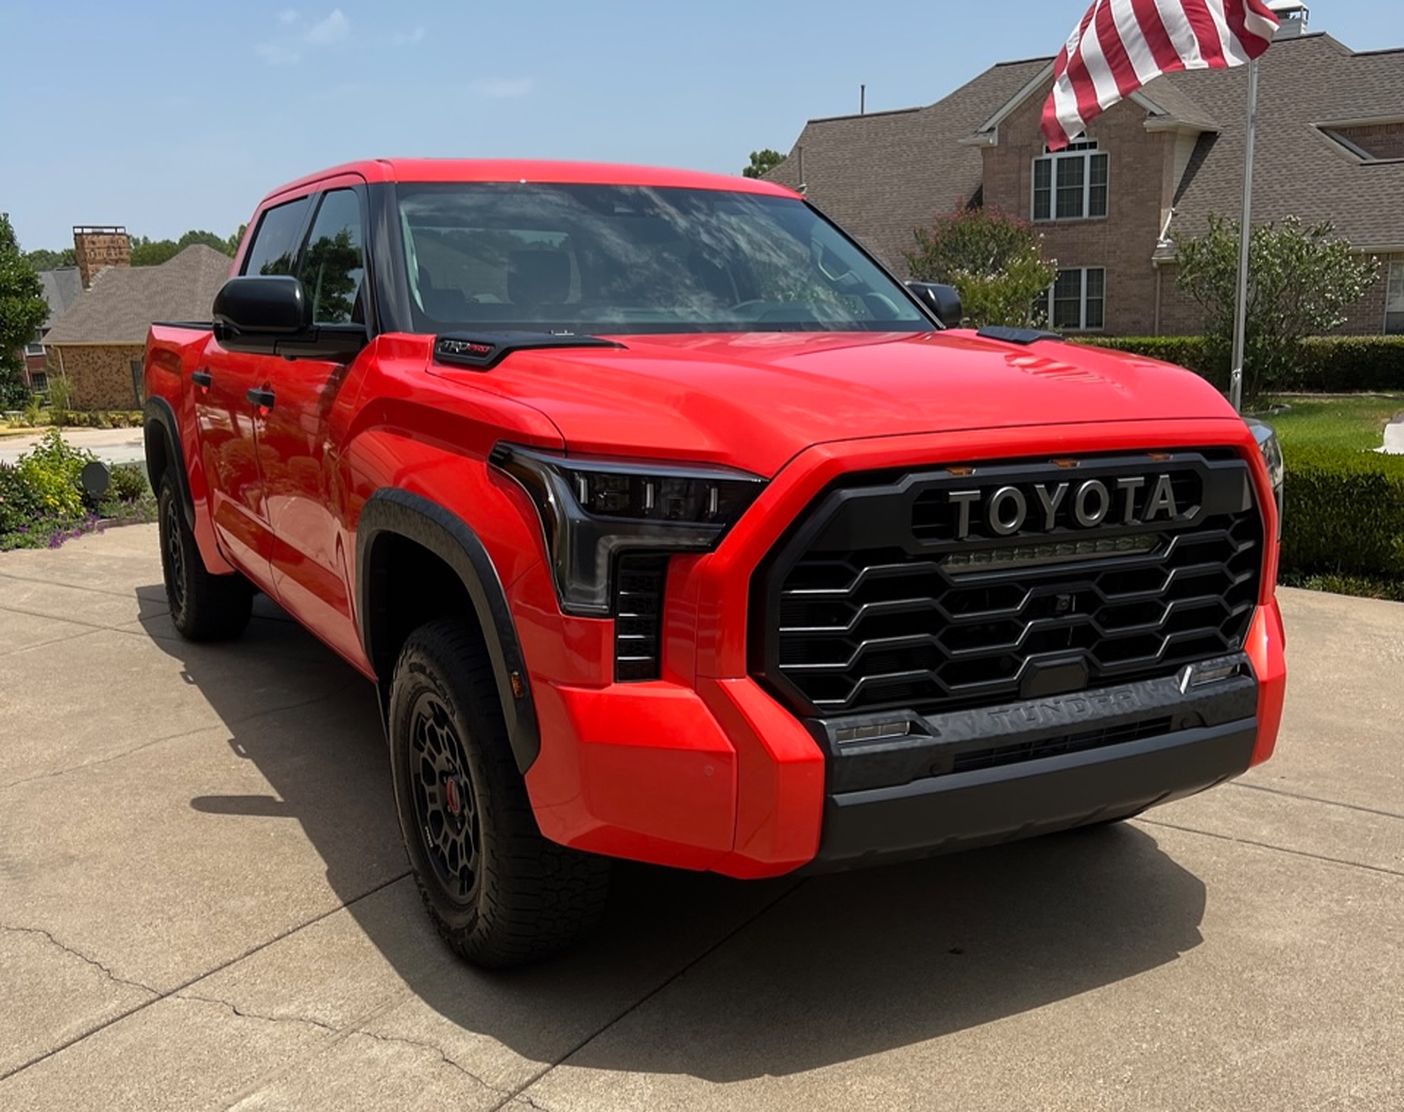 REVIEW: 2022 Toyota Tundra TRD Pro i-FORCE MAX Hybrid